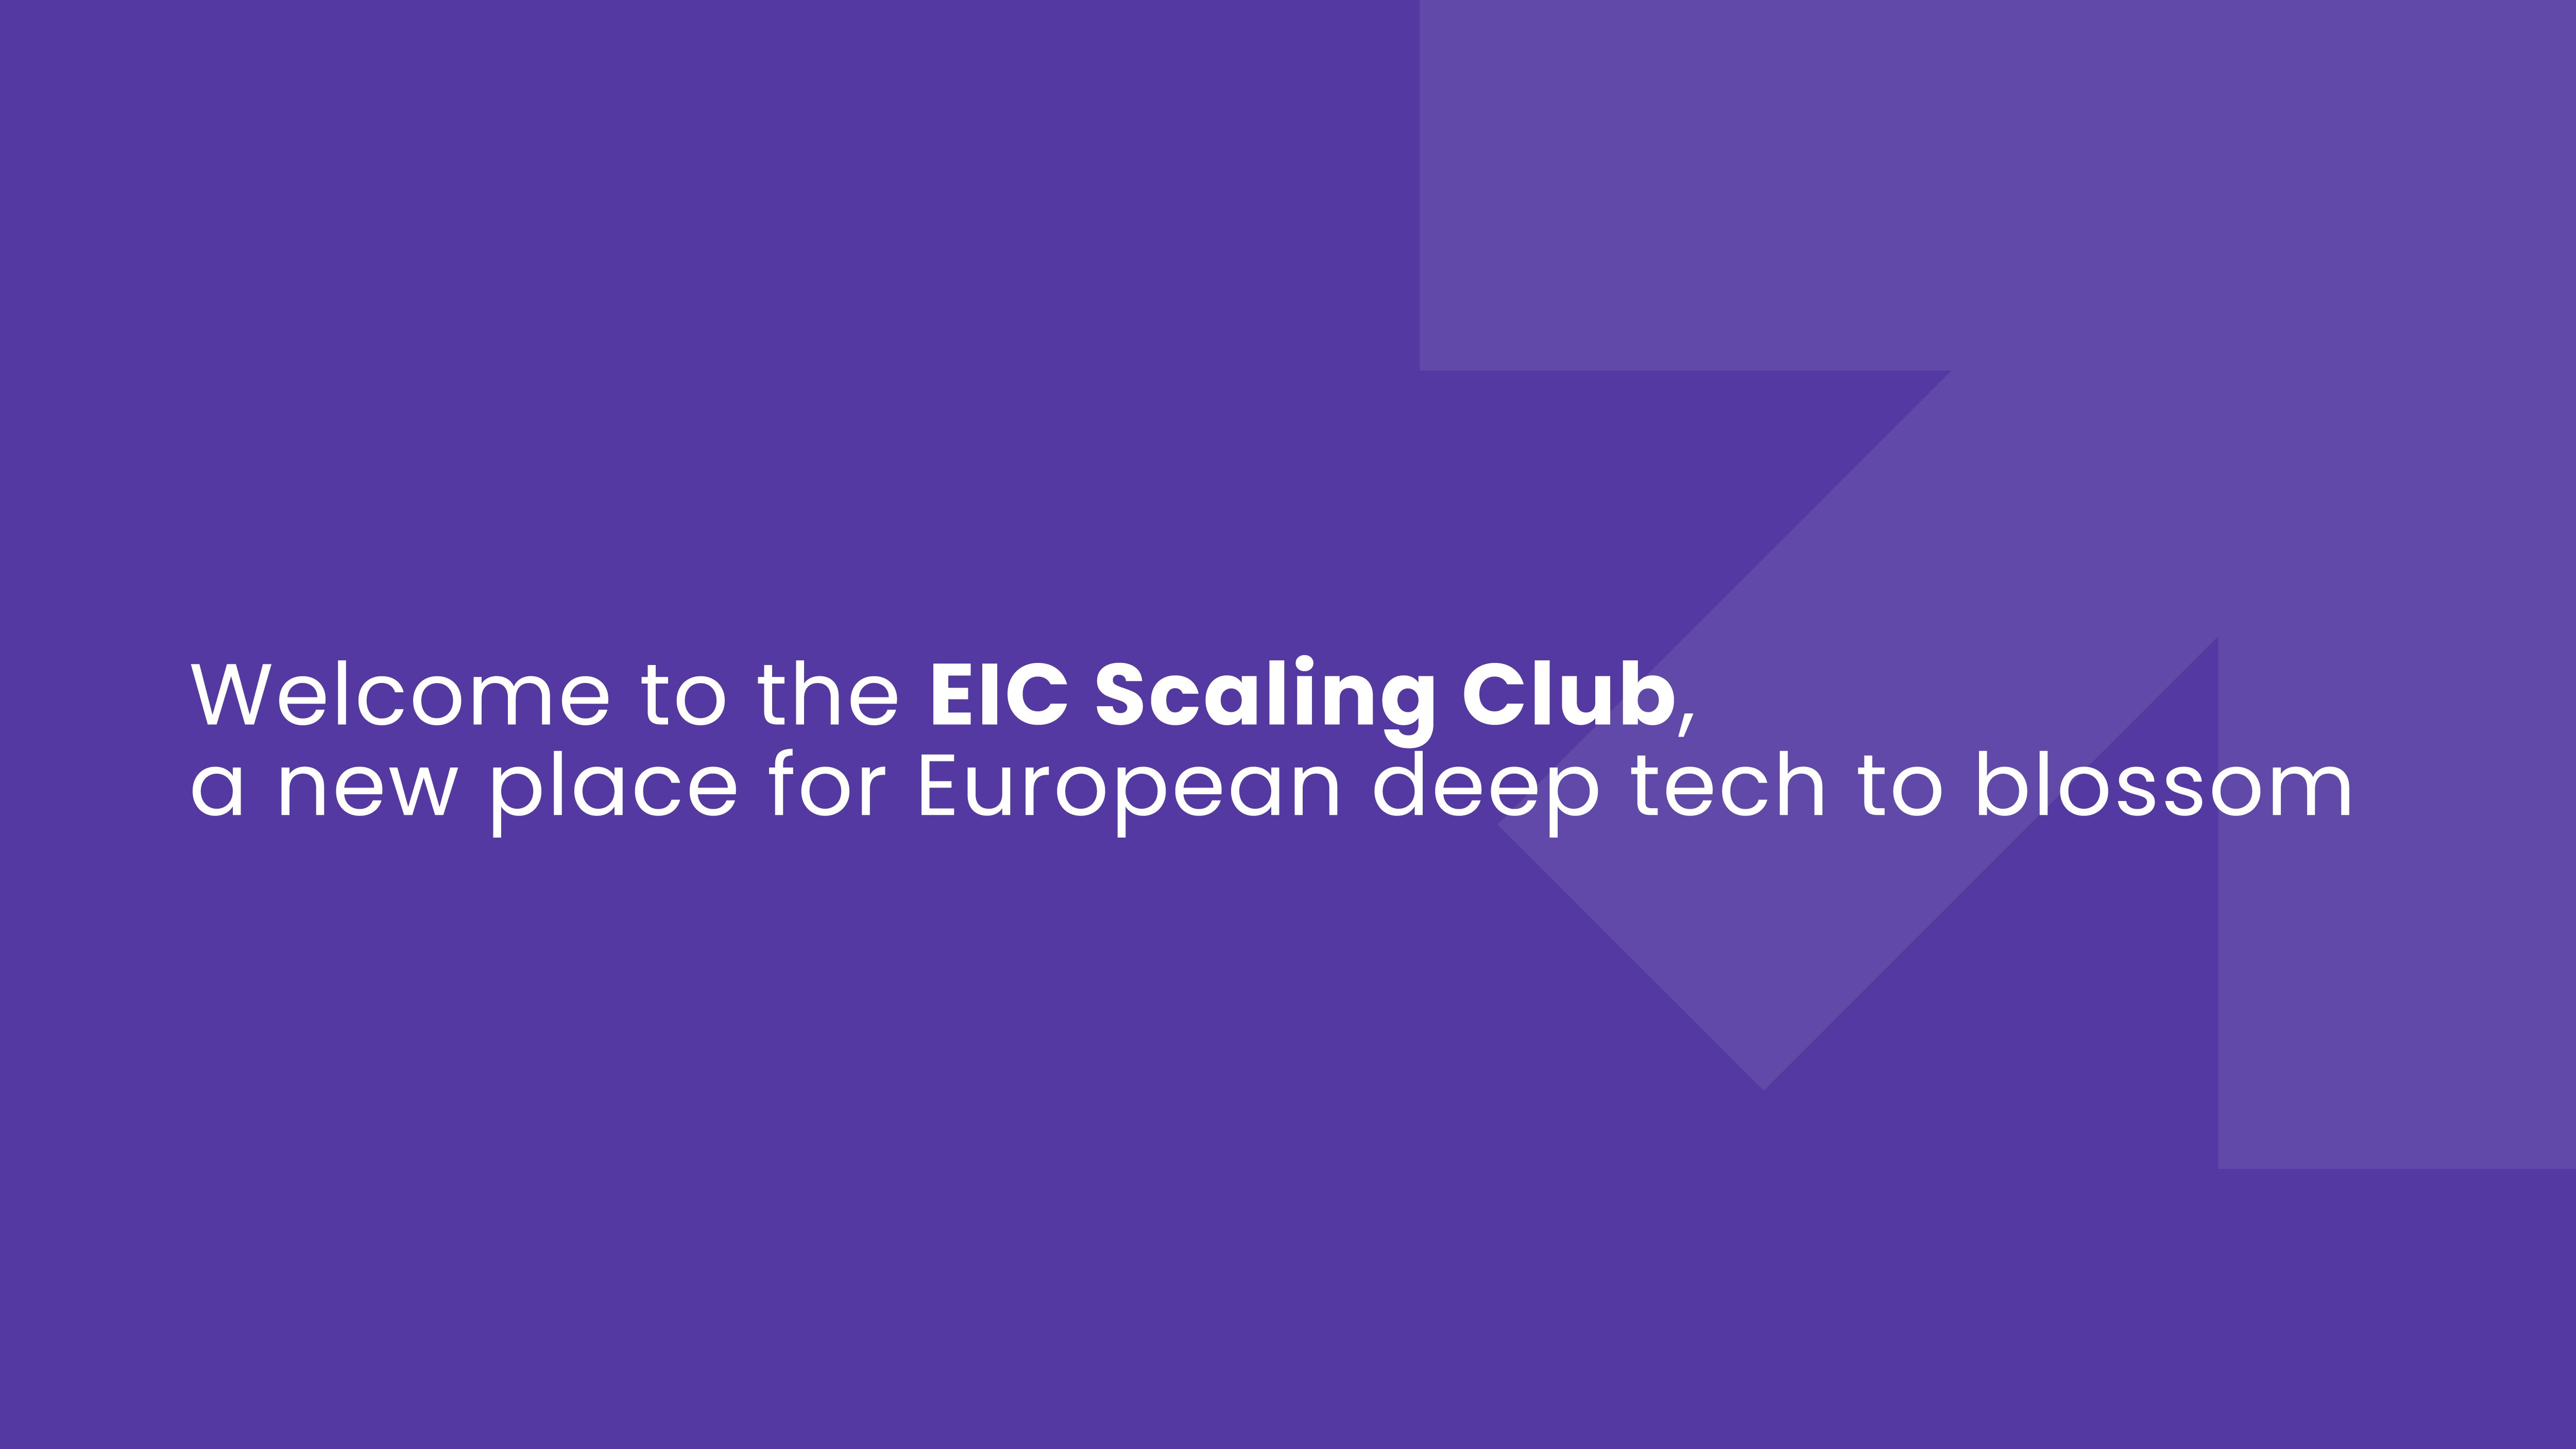 EIC_Scaling Club_banners_Twitter